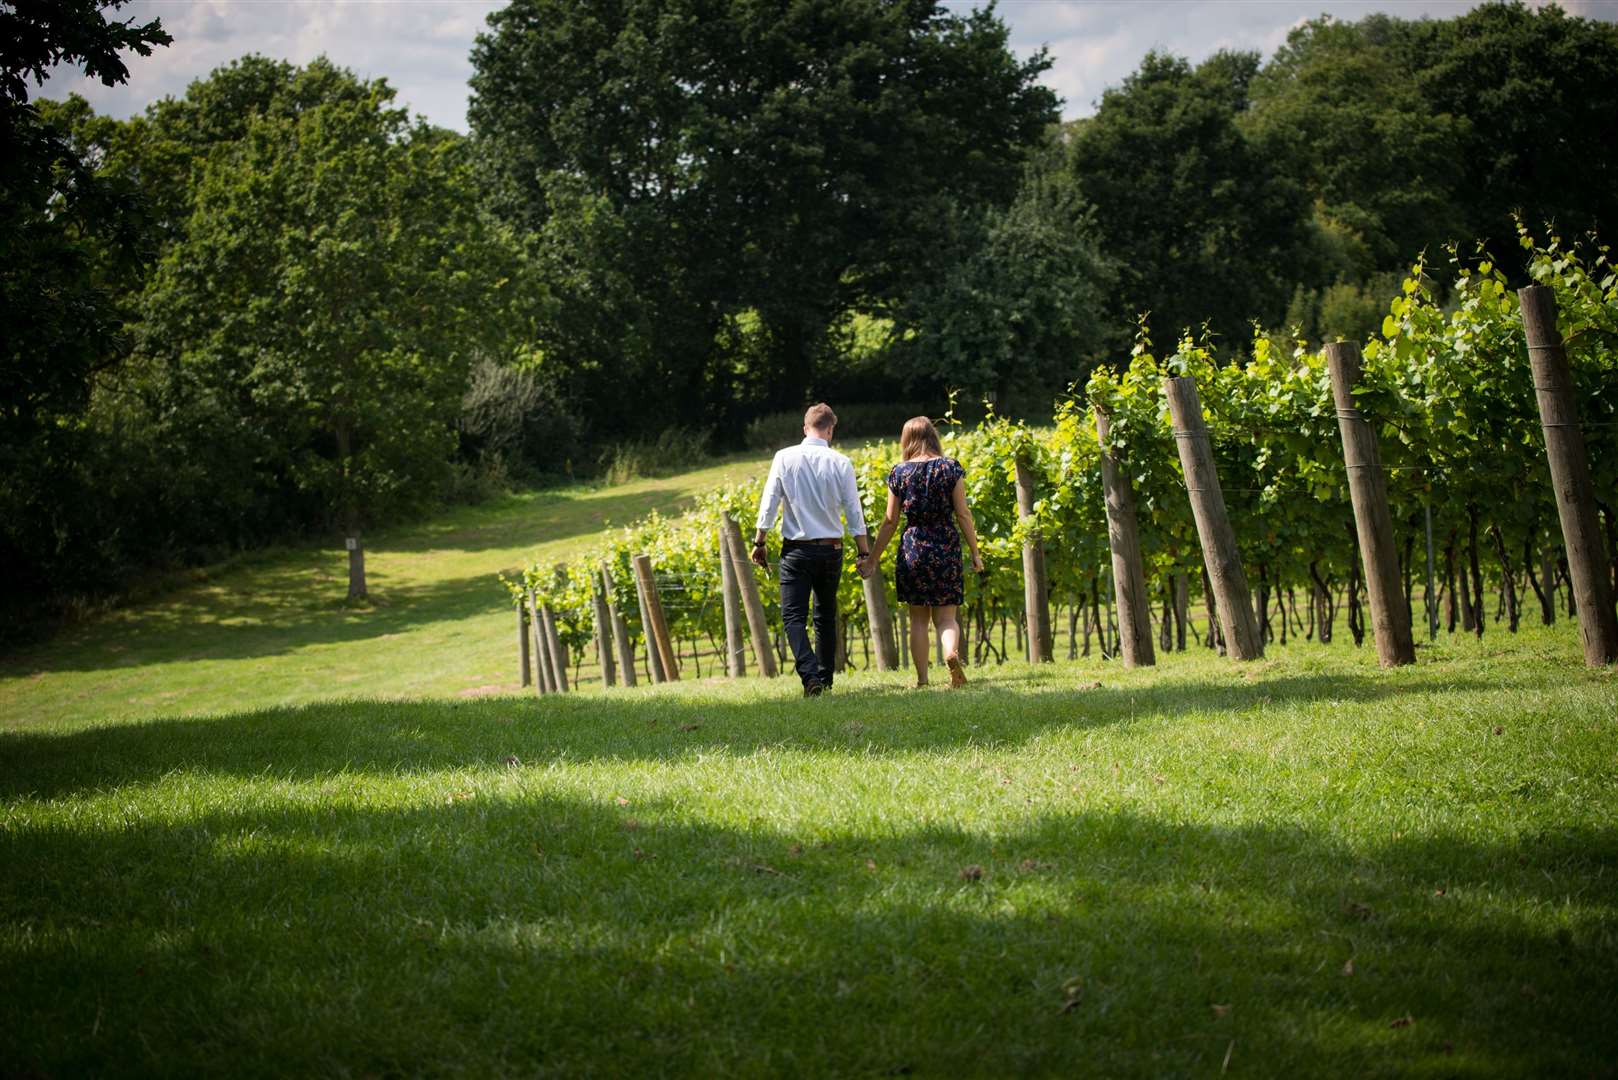 Chapel Down is now one of England's leading wine producers